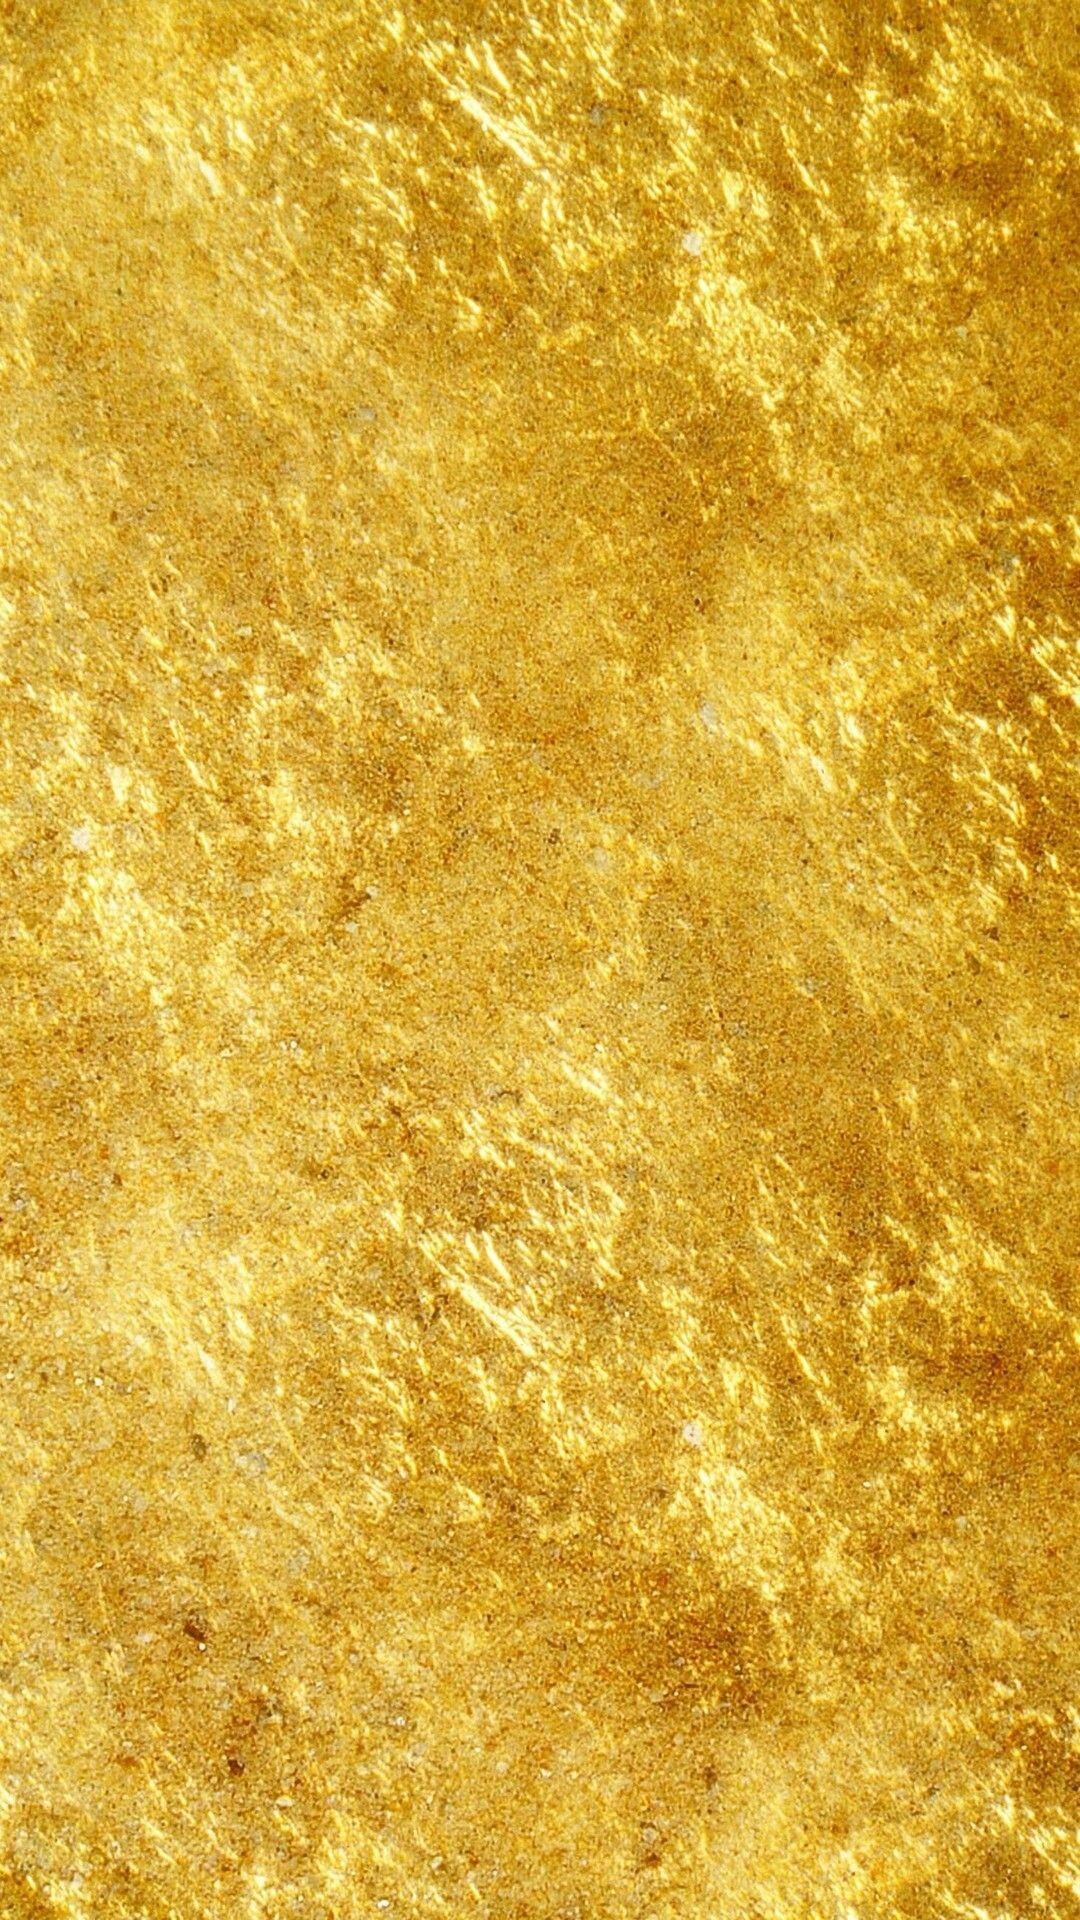 Gold Foil: Mercury-gilding, Invented by Chinese Daoists in the 4th century CE. 1080x1920 Full HD Background.